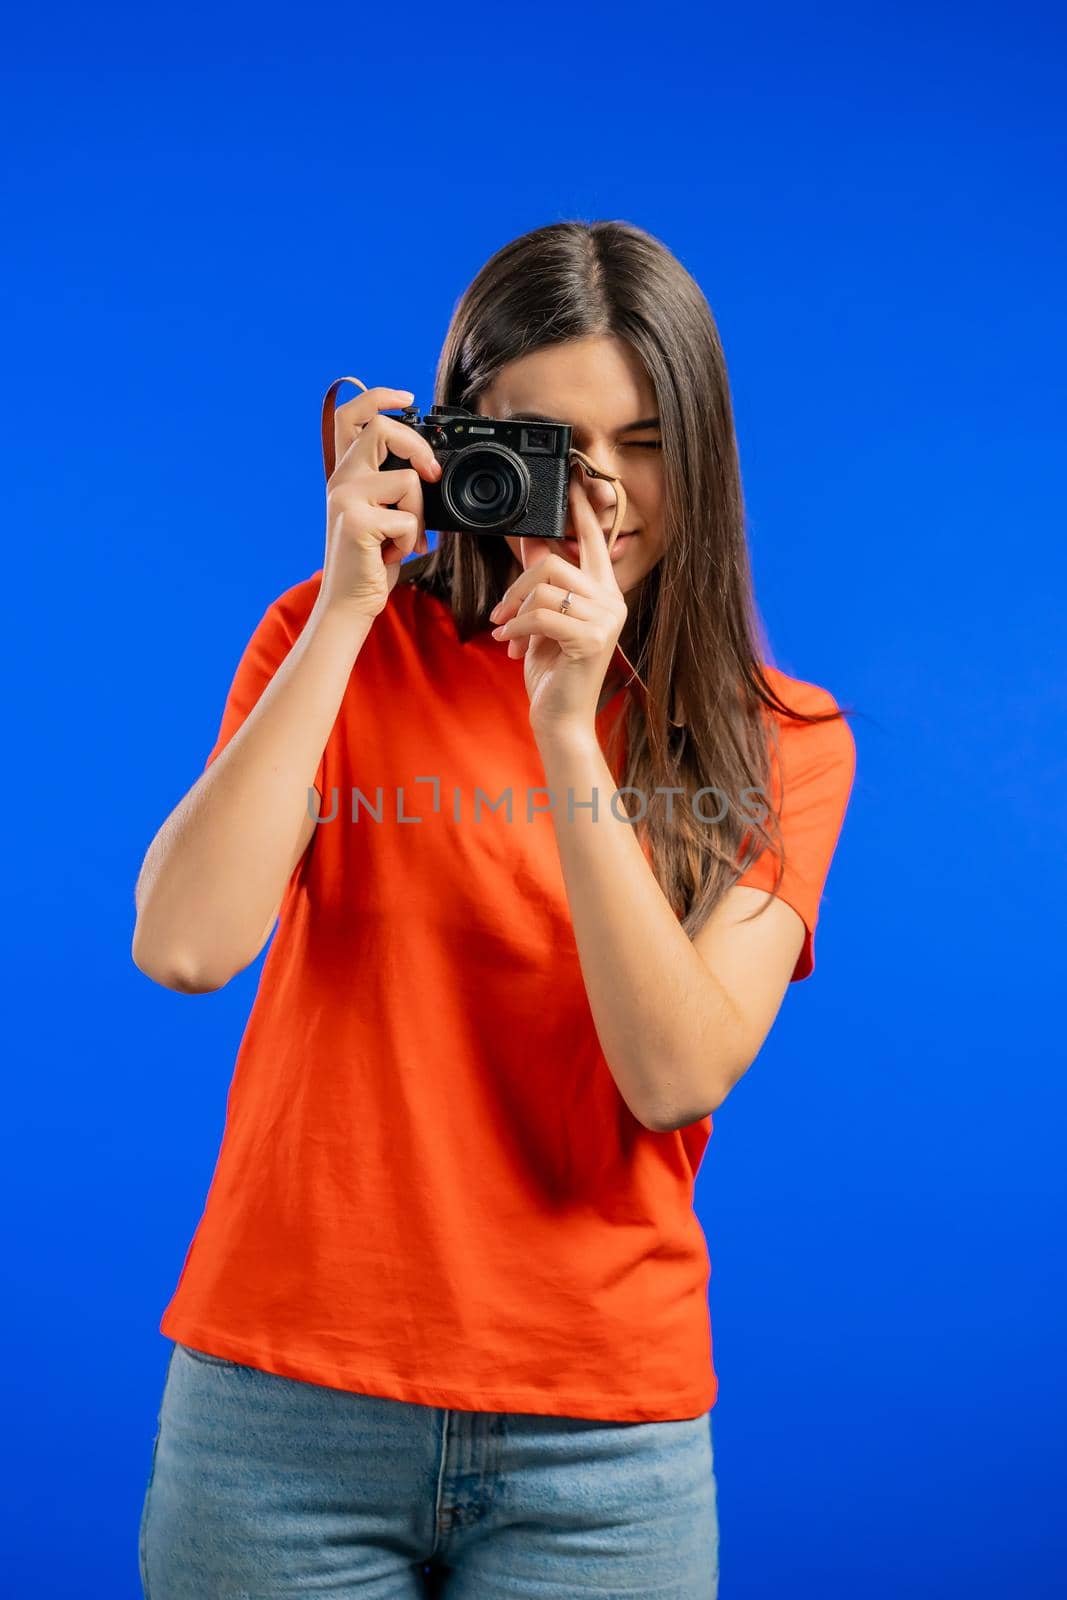 Young pretty woman takes pictures with DSLR camera over blue background in studio. Girl smiling as photographer. High quality photo